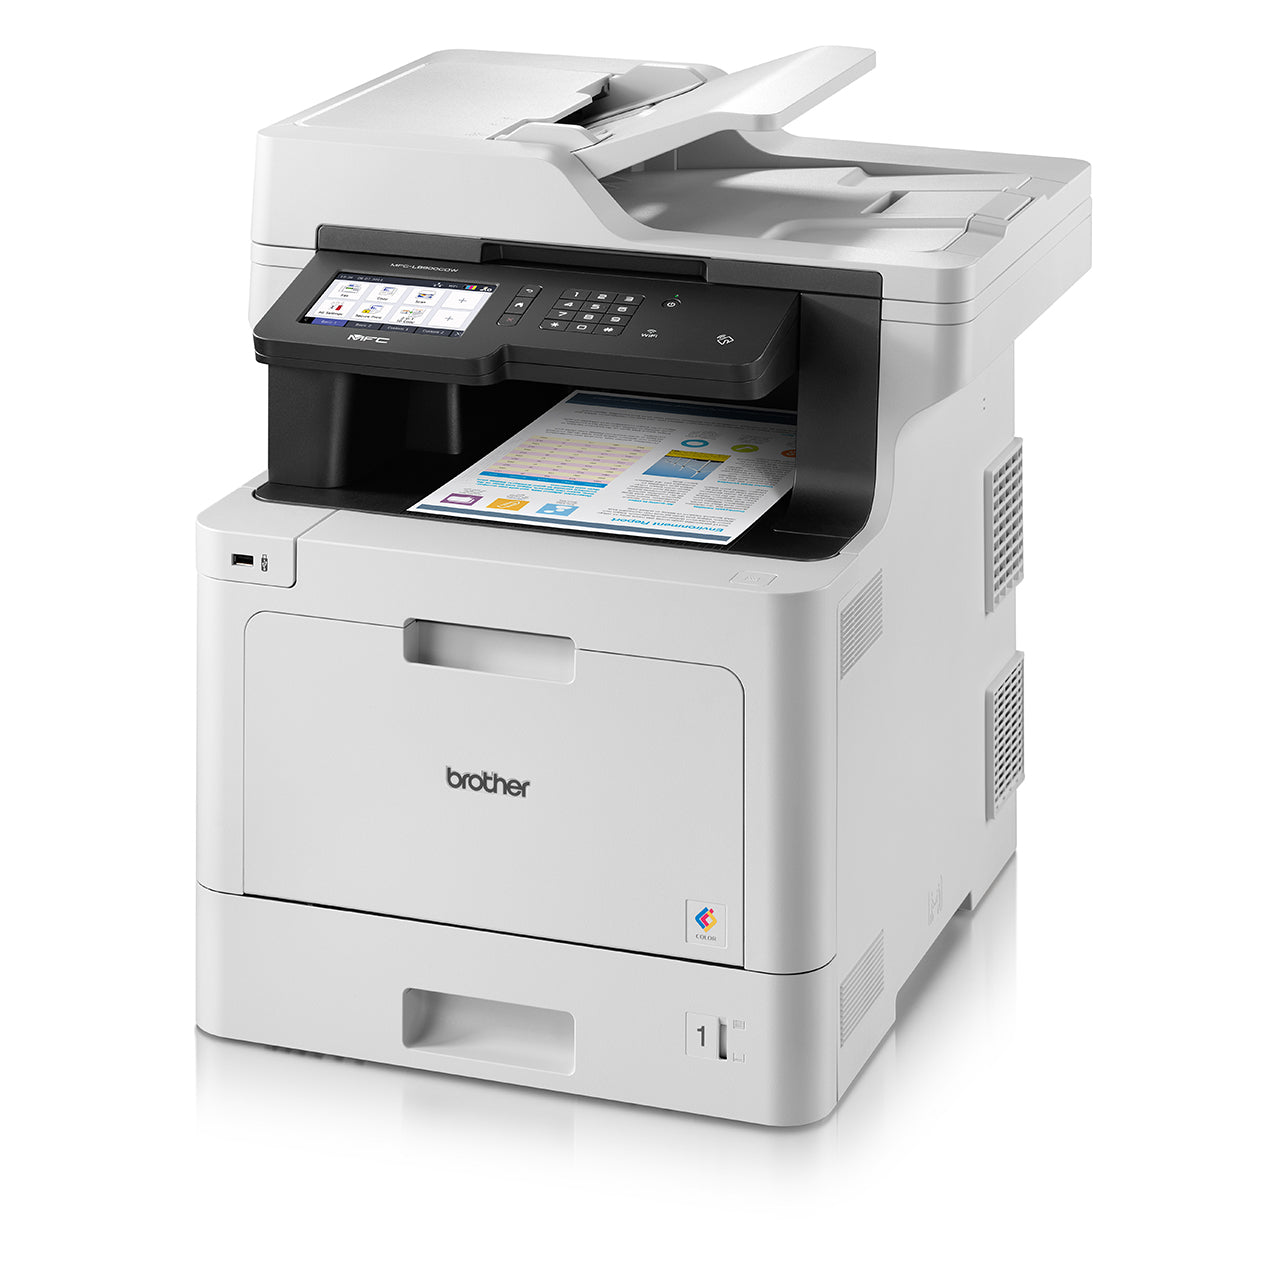 Brother MFC-L8900CDW All-in-One Colored Laser Printer with Print, Scan, Copy and Fax, Duplex Printing, 5" TFT Color LCD with Wireless Networking and NFC Card Reader for Business and Office Use